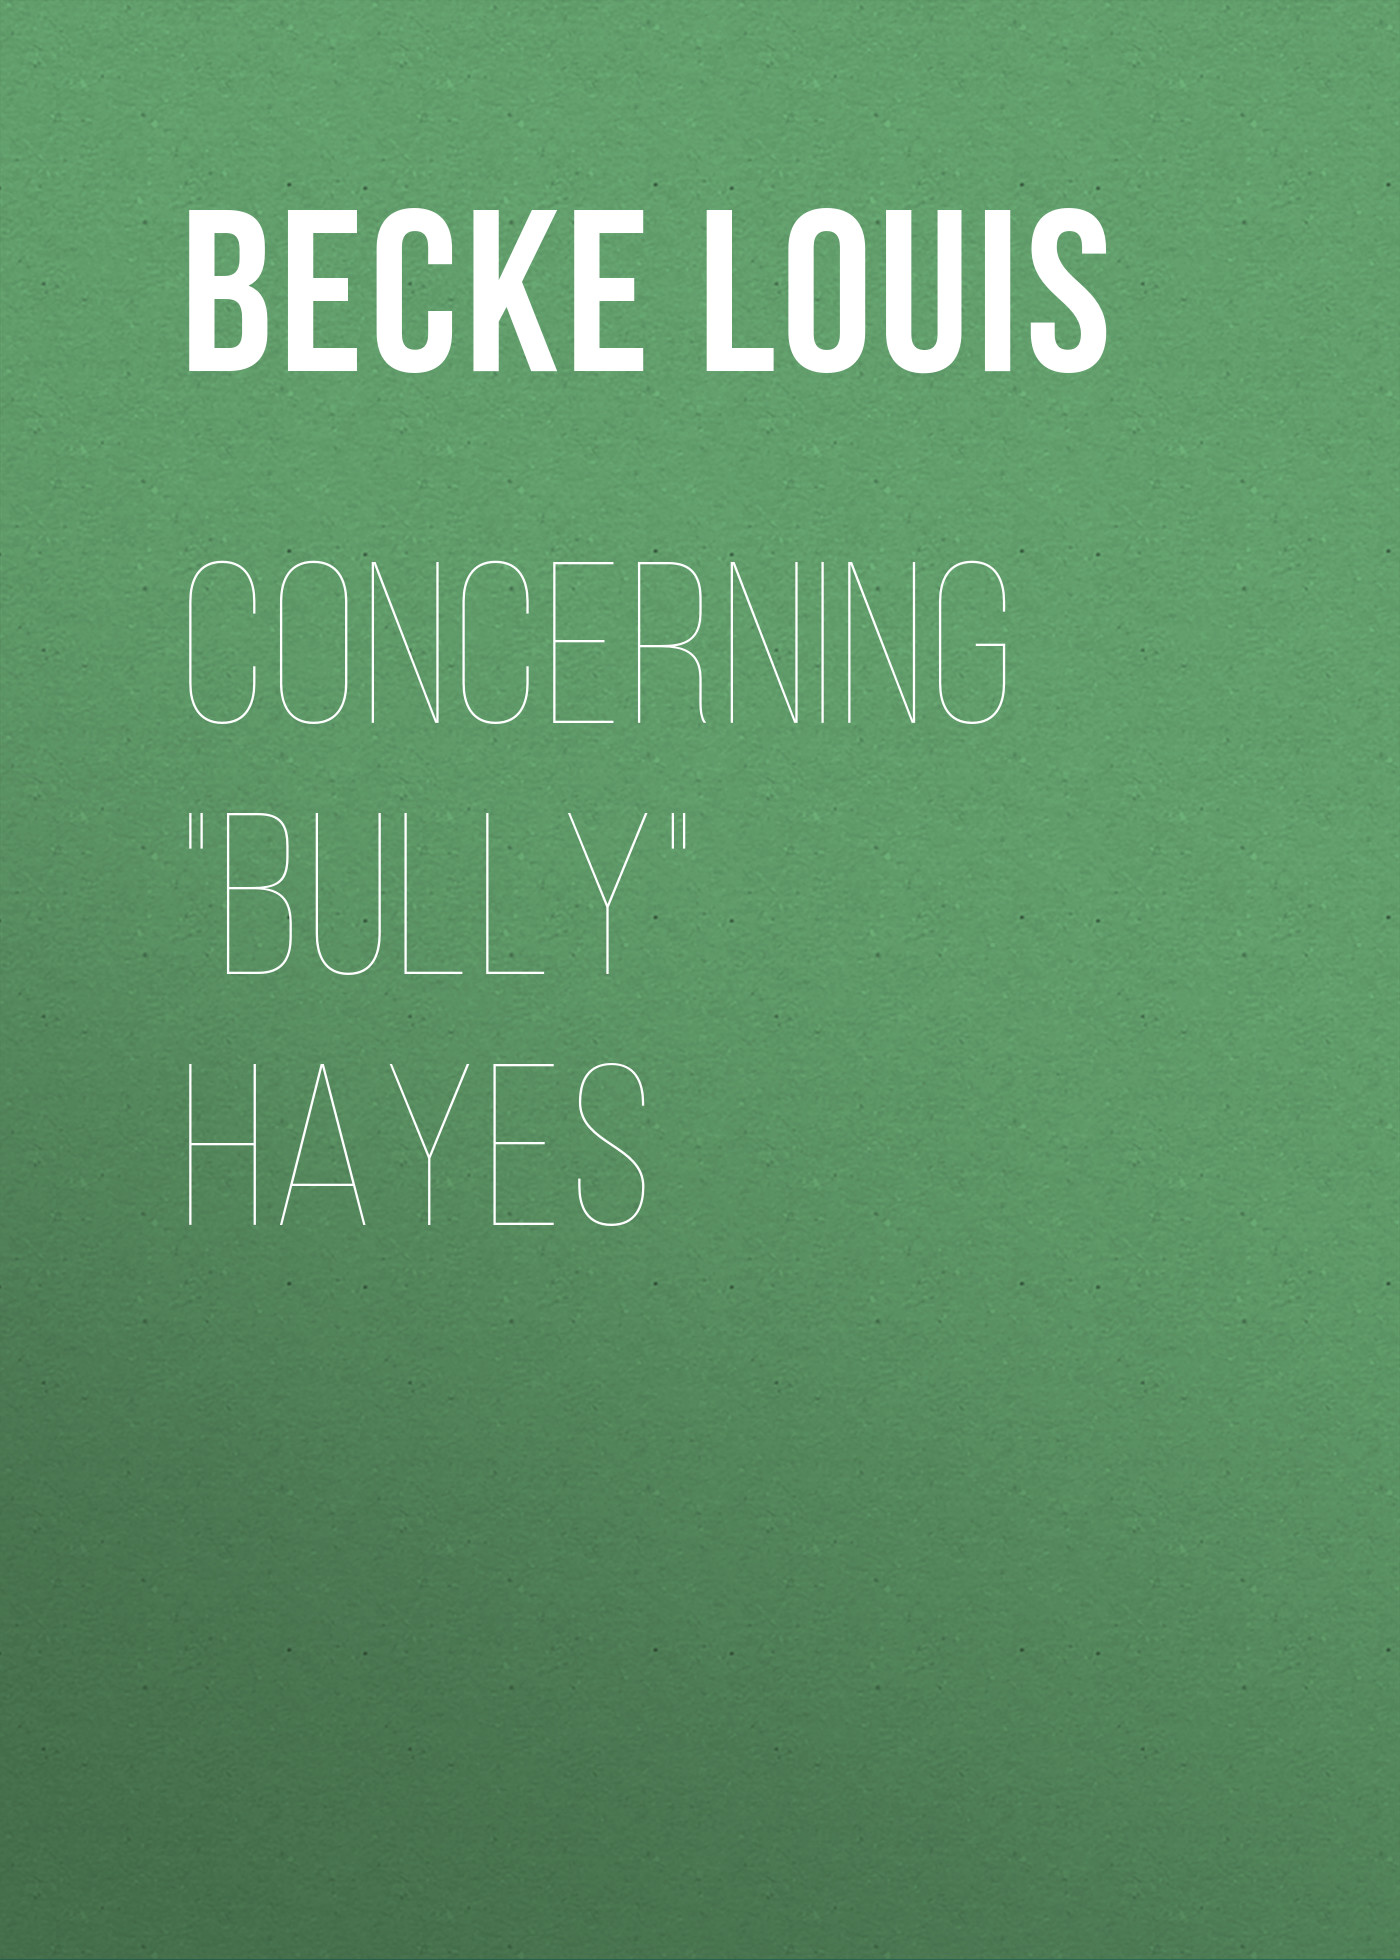 Concerning"Bully"Hayes